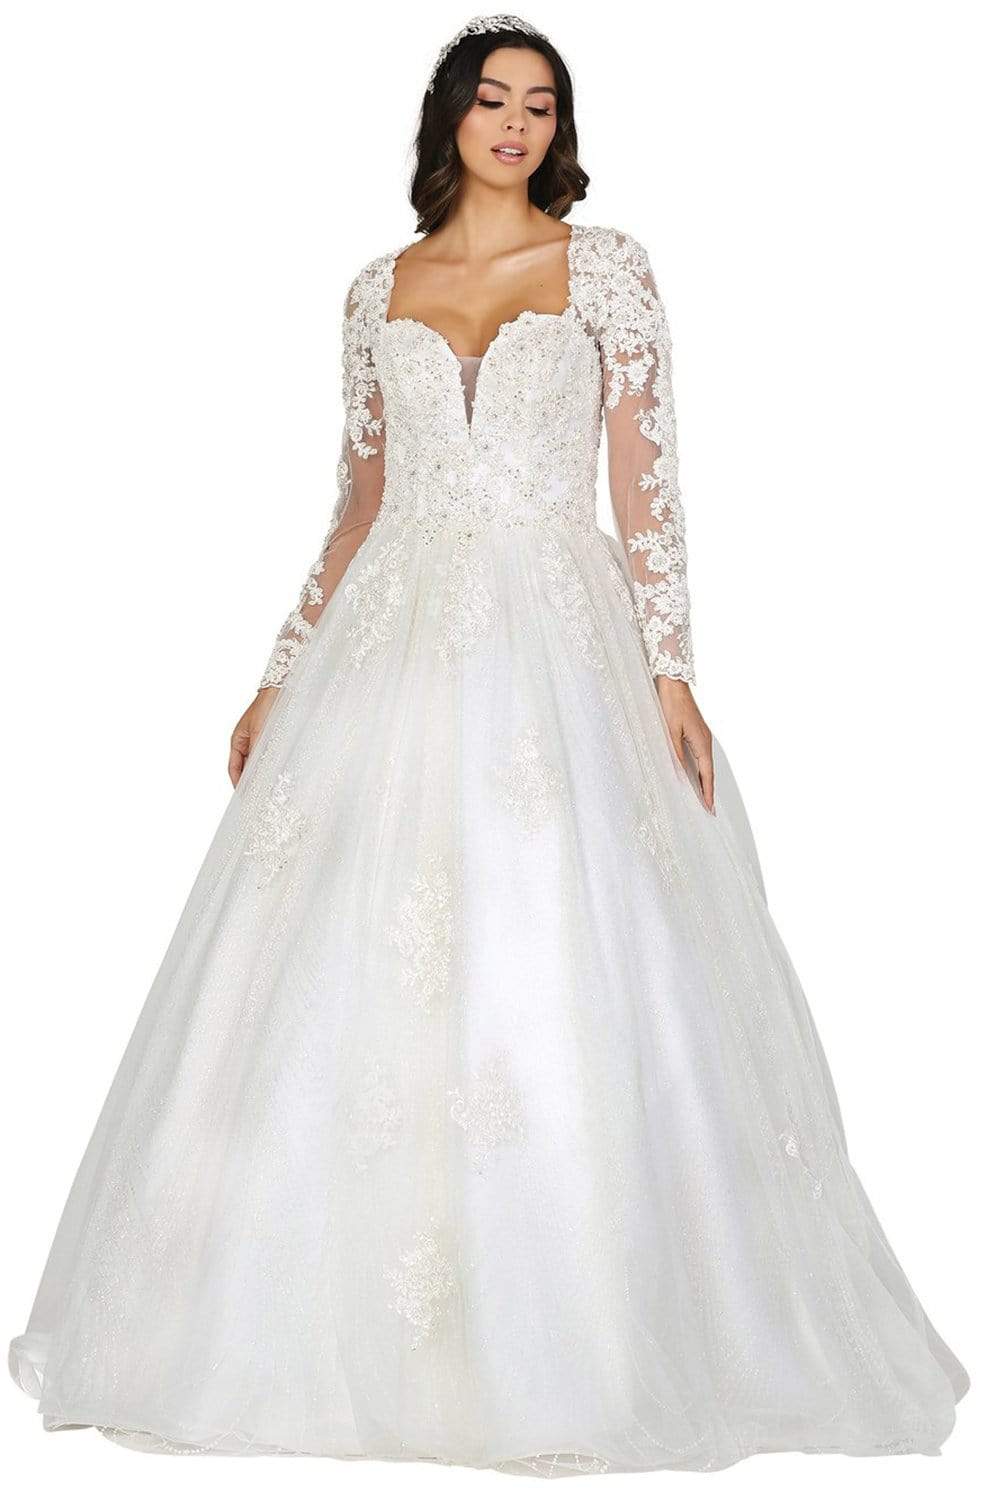 Dancing Queen - 156 Embroidered Long Sleeve Deep Sweetheart Gown
